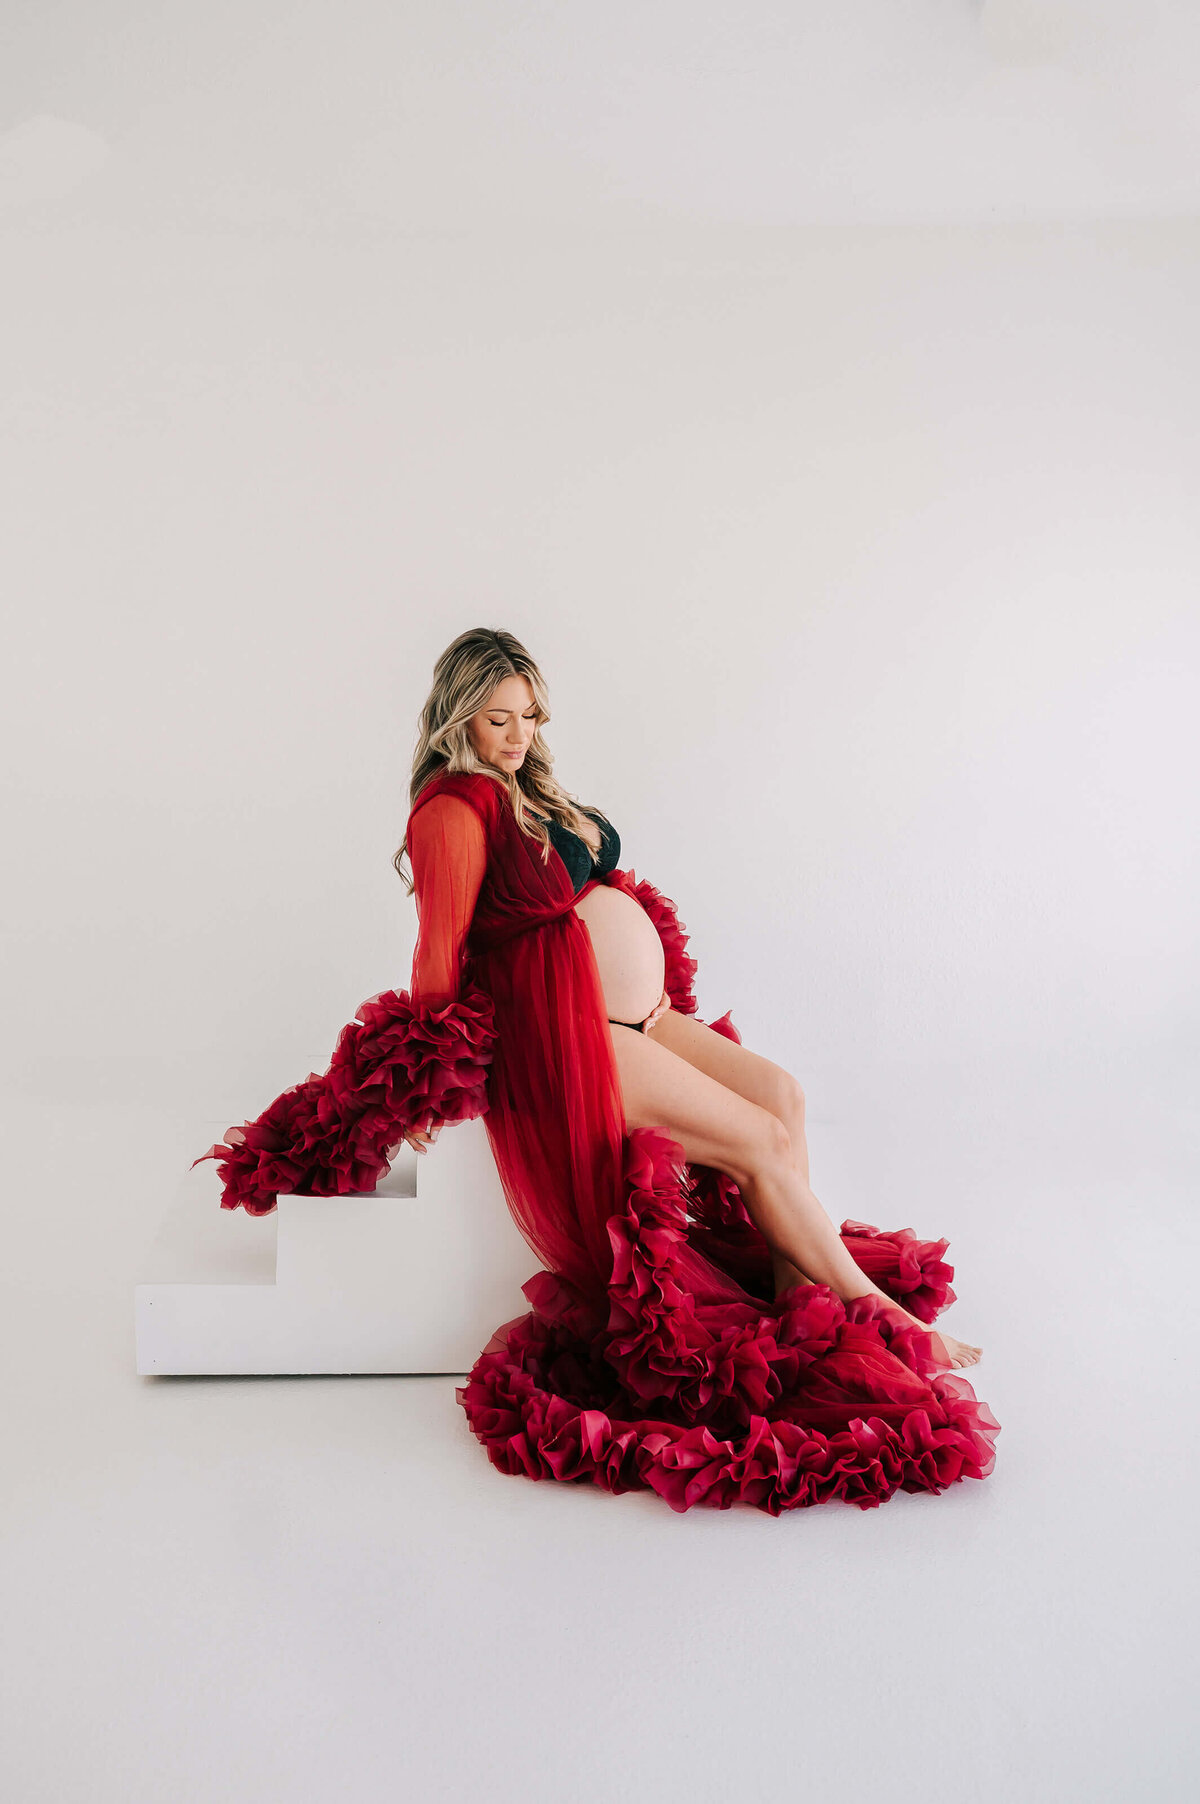 Springfield MO maternity photographer Jessica Kennedy of The XO Photography captures pregnant mom in red robe sitting on step